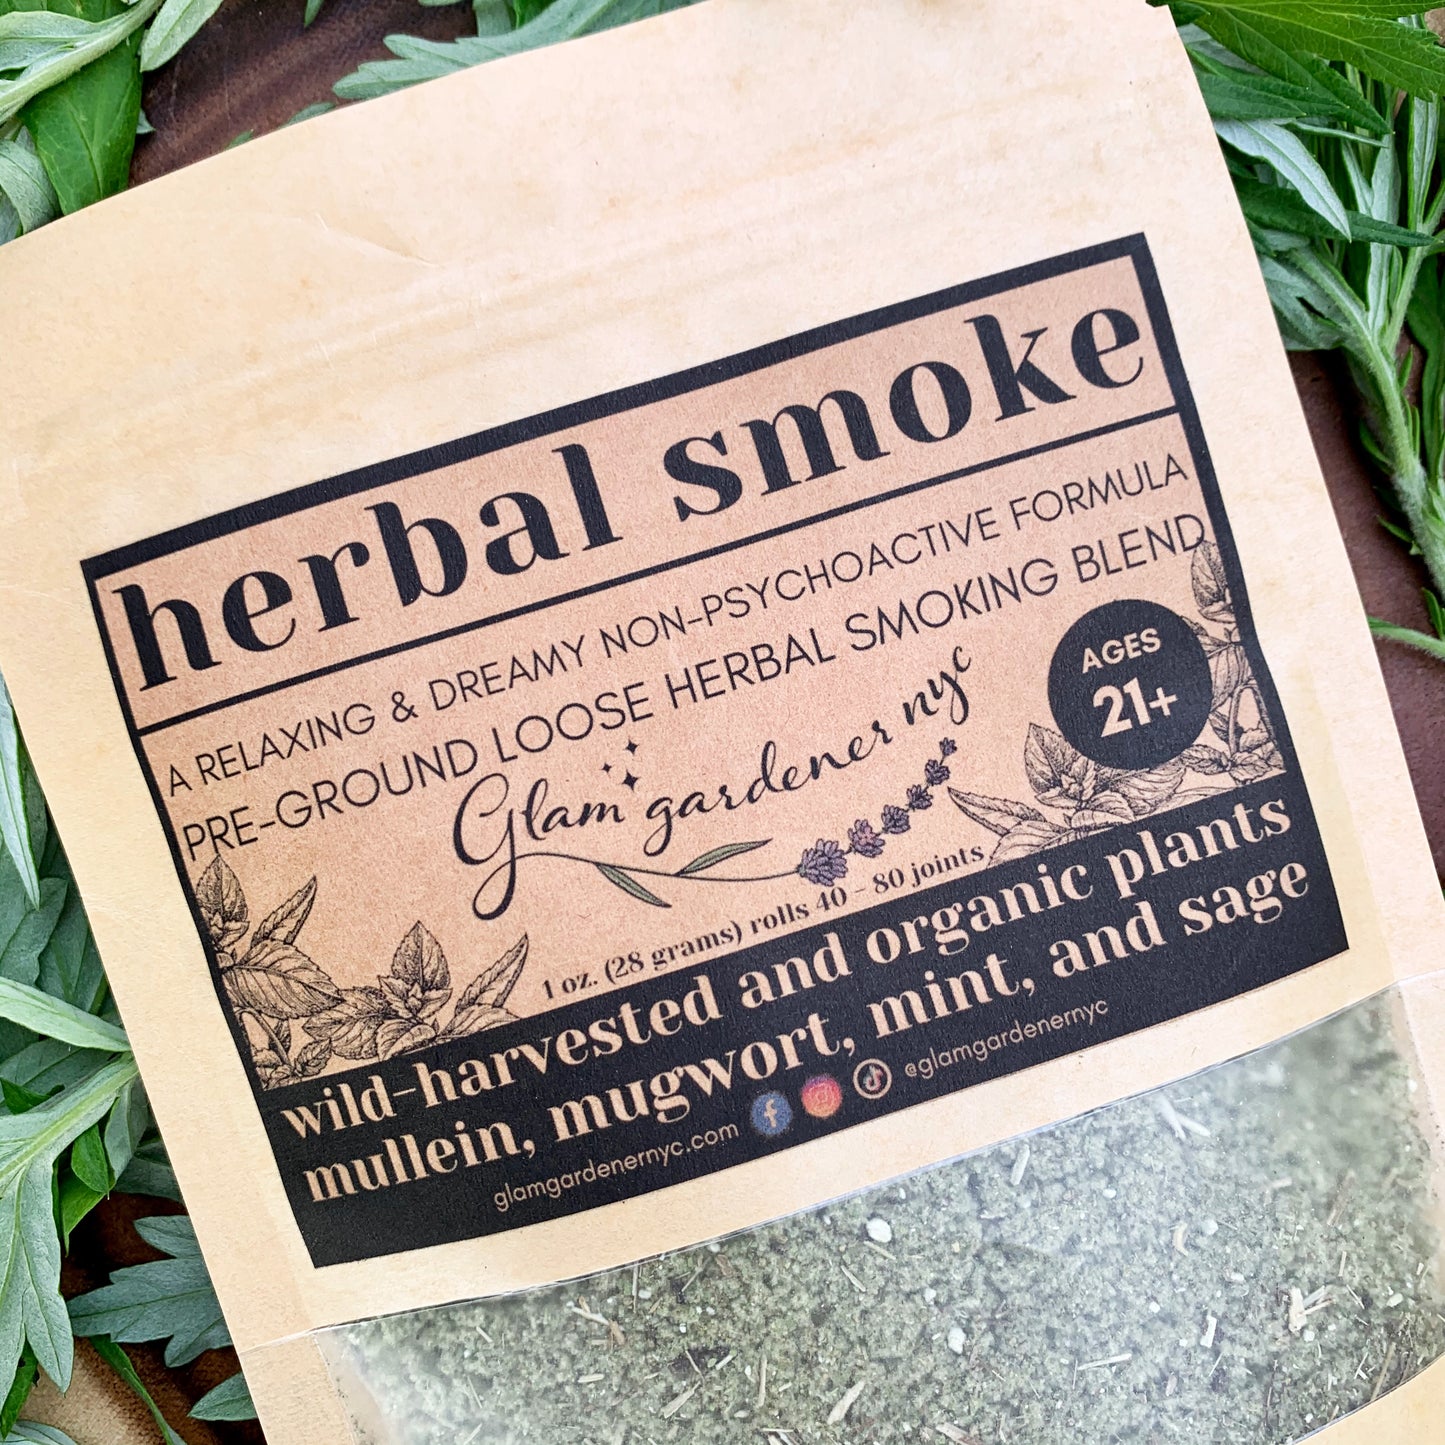 Does anyone grow other smokable herbs apart from mint to incorporate in  your tobacco blends? Being a menthol guy I always include mint at the  shredding stage before aging, it infuses into